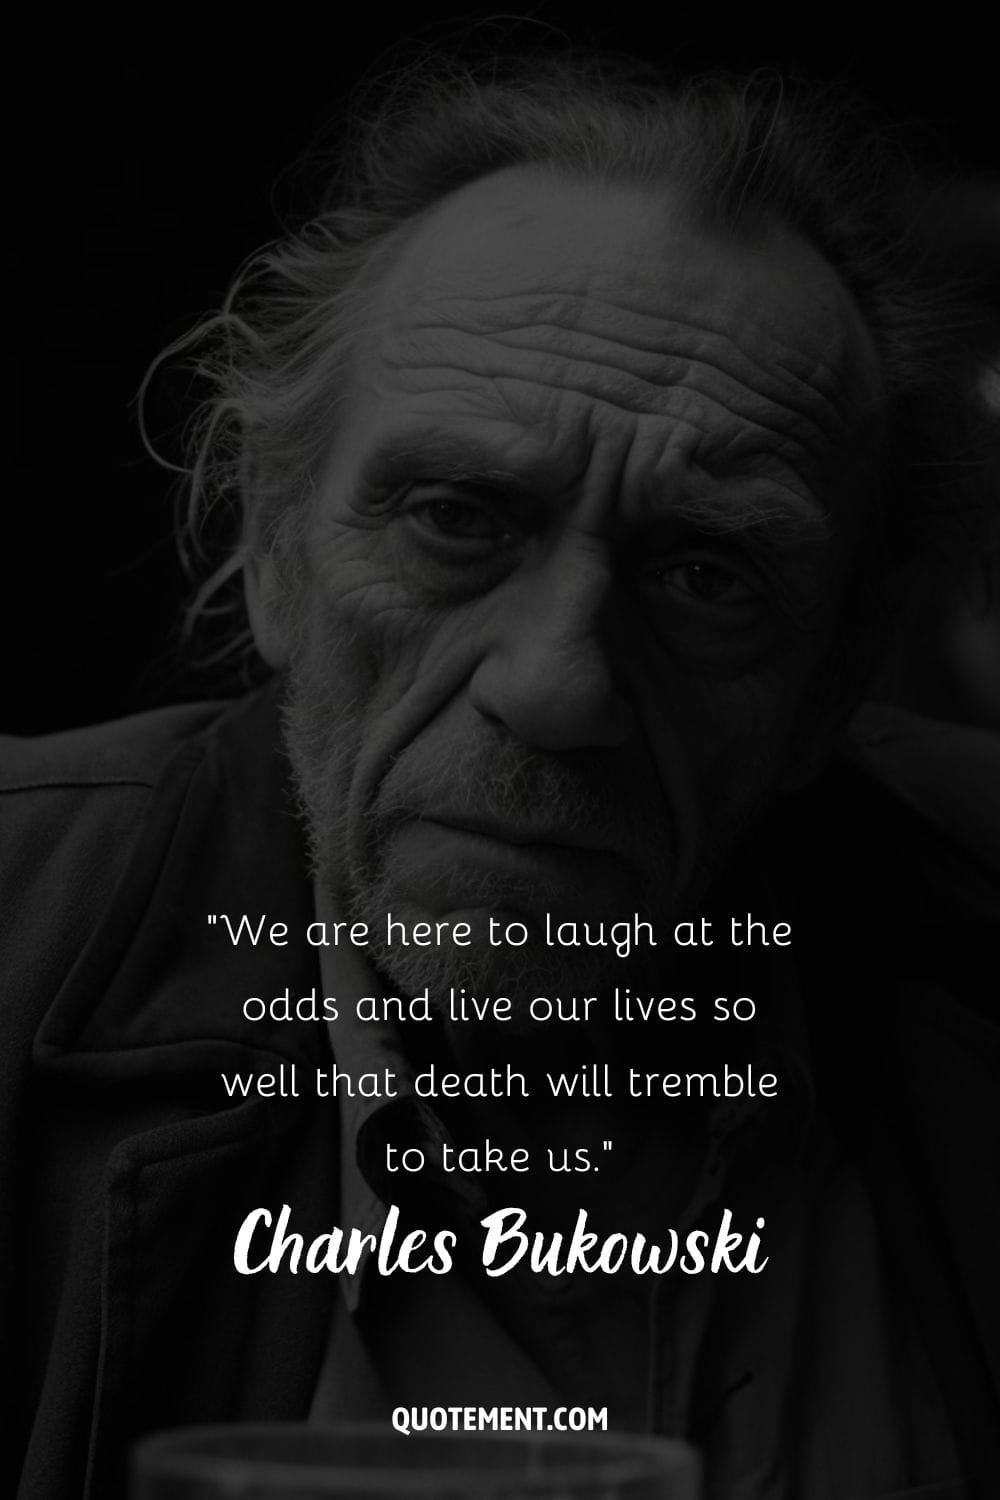 Charles Bukowski with an intense face expression